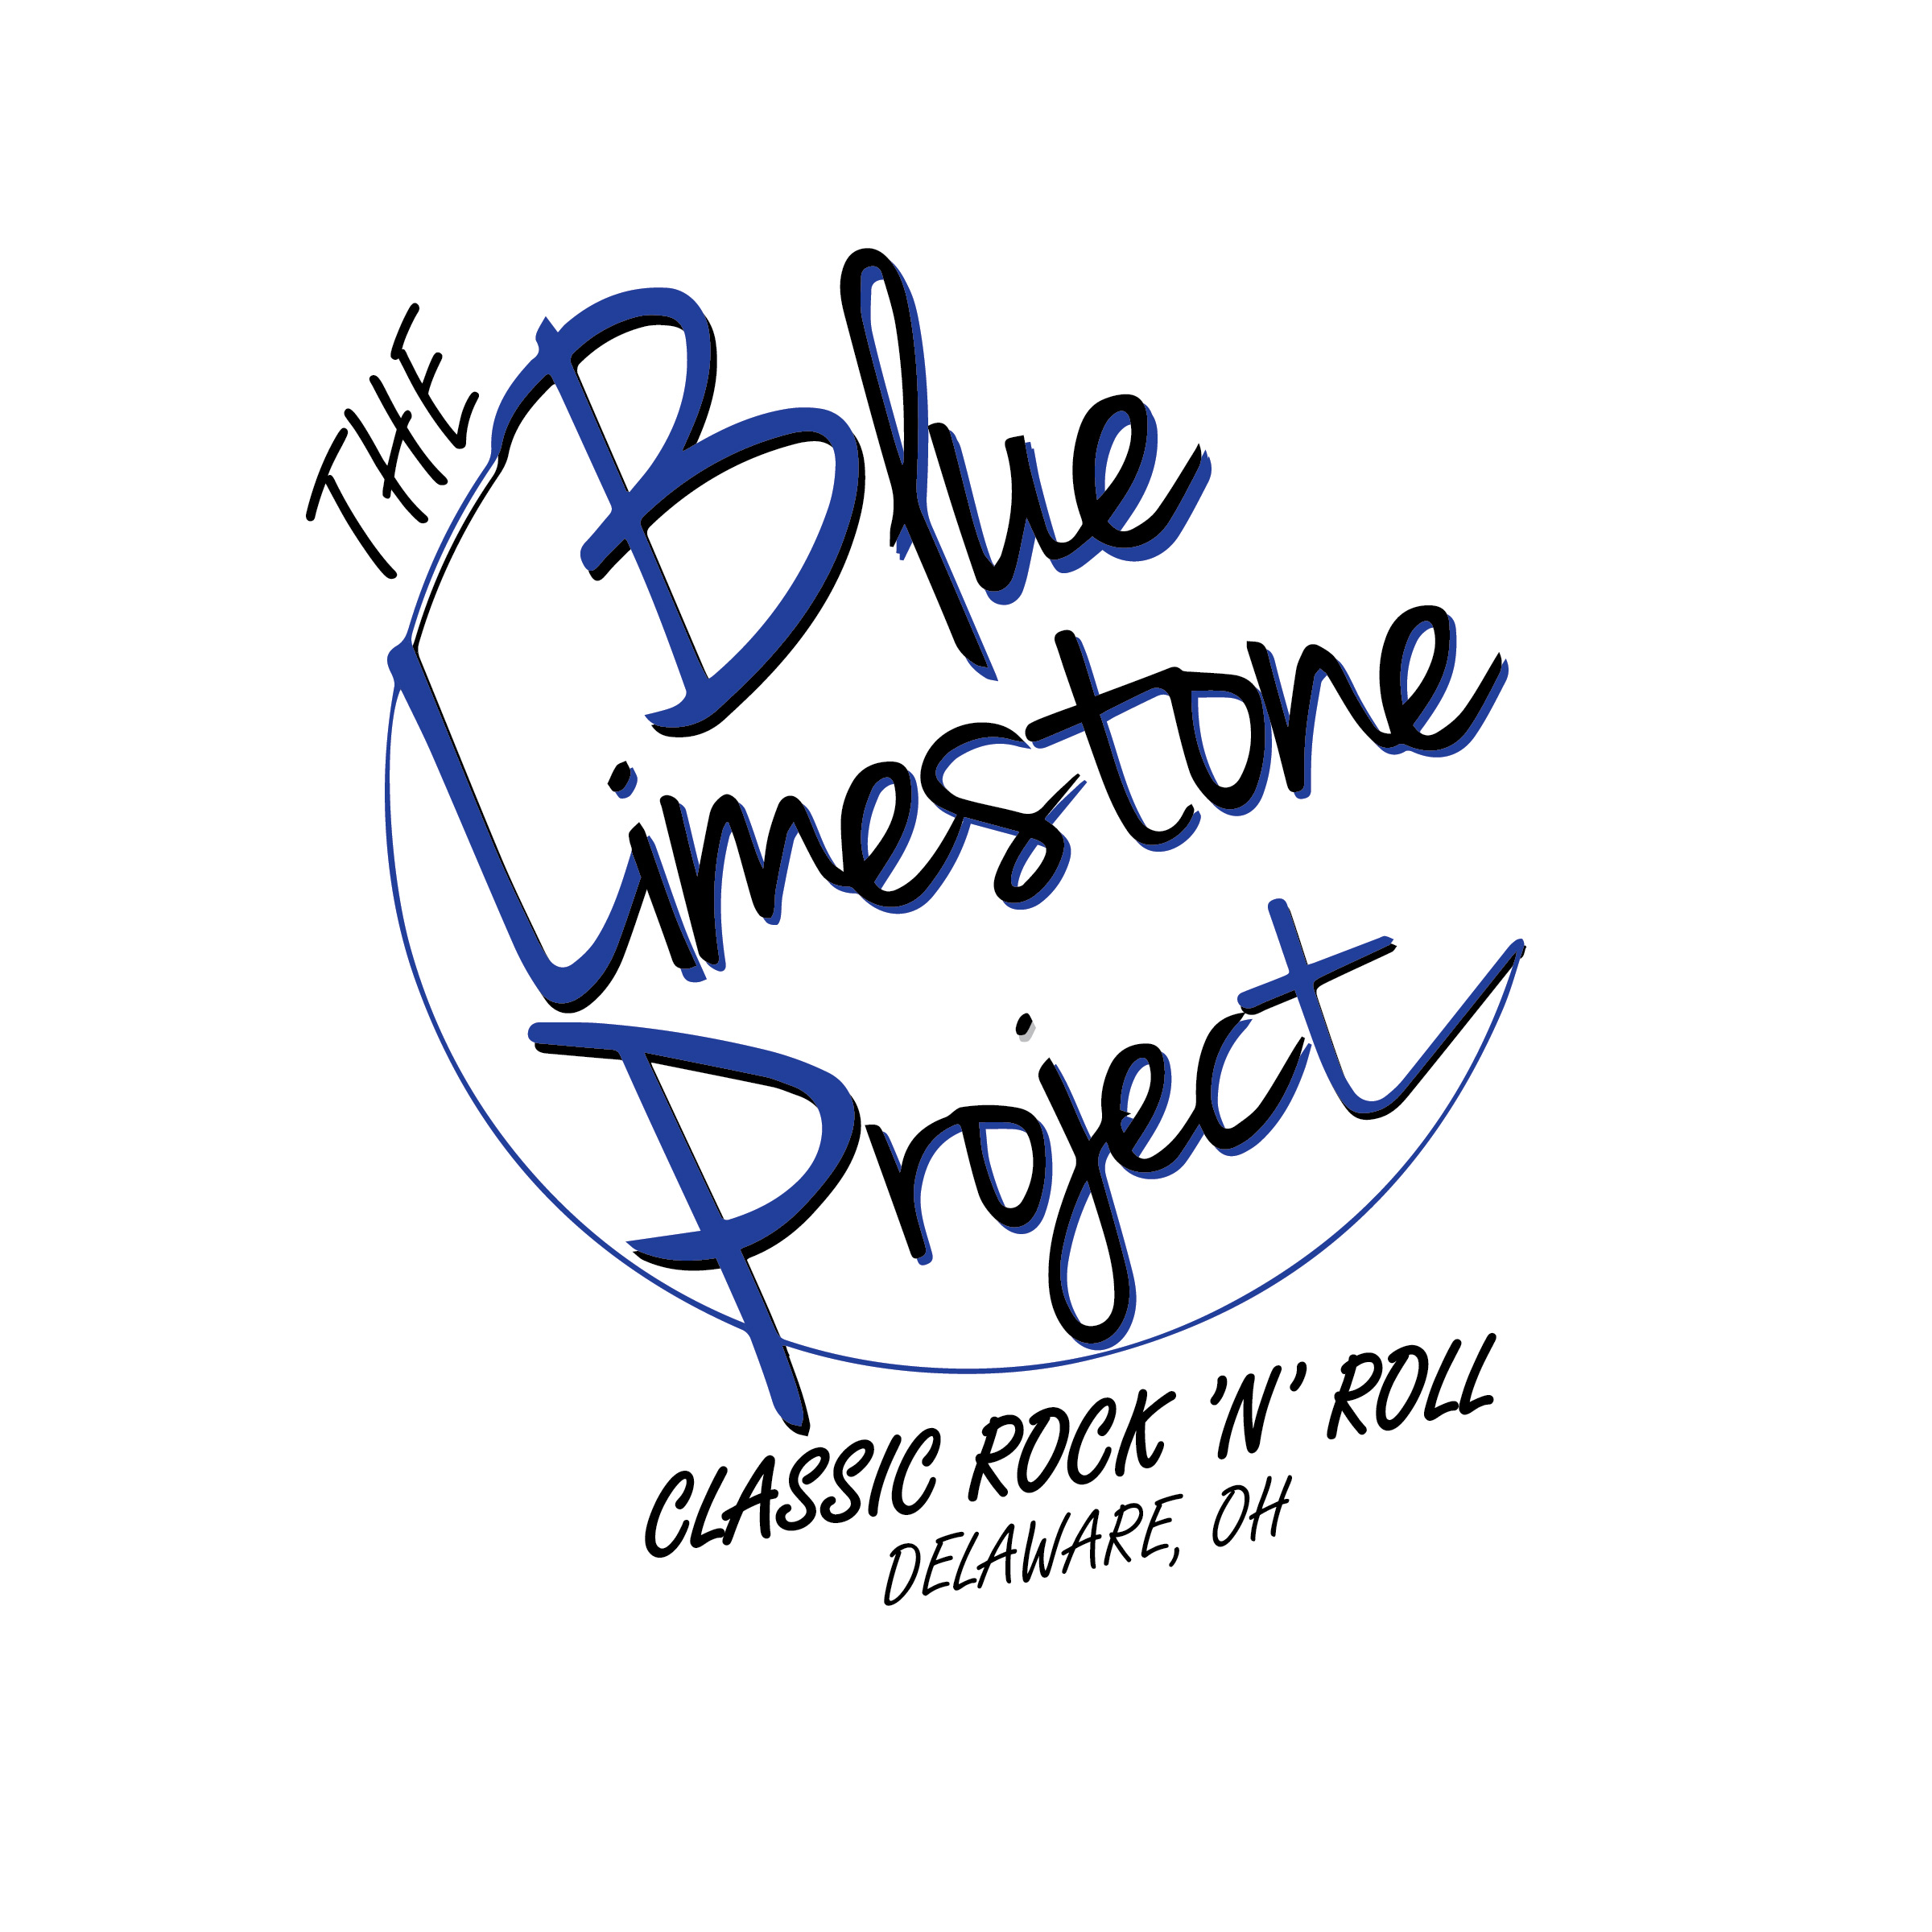 The Blue Limestone Project